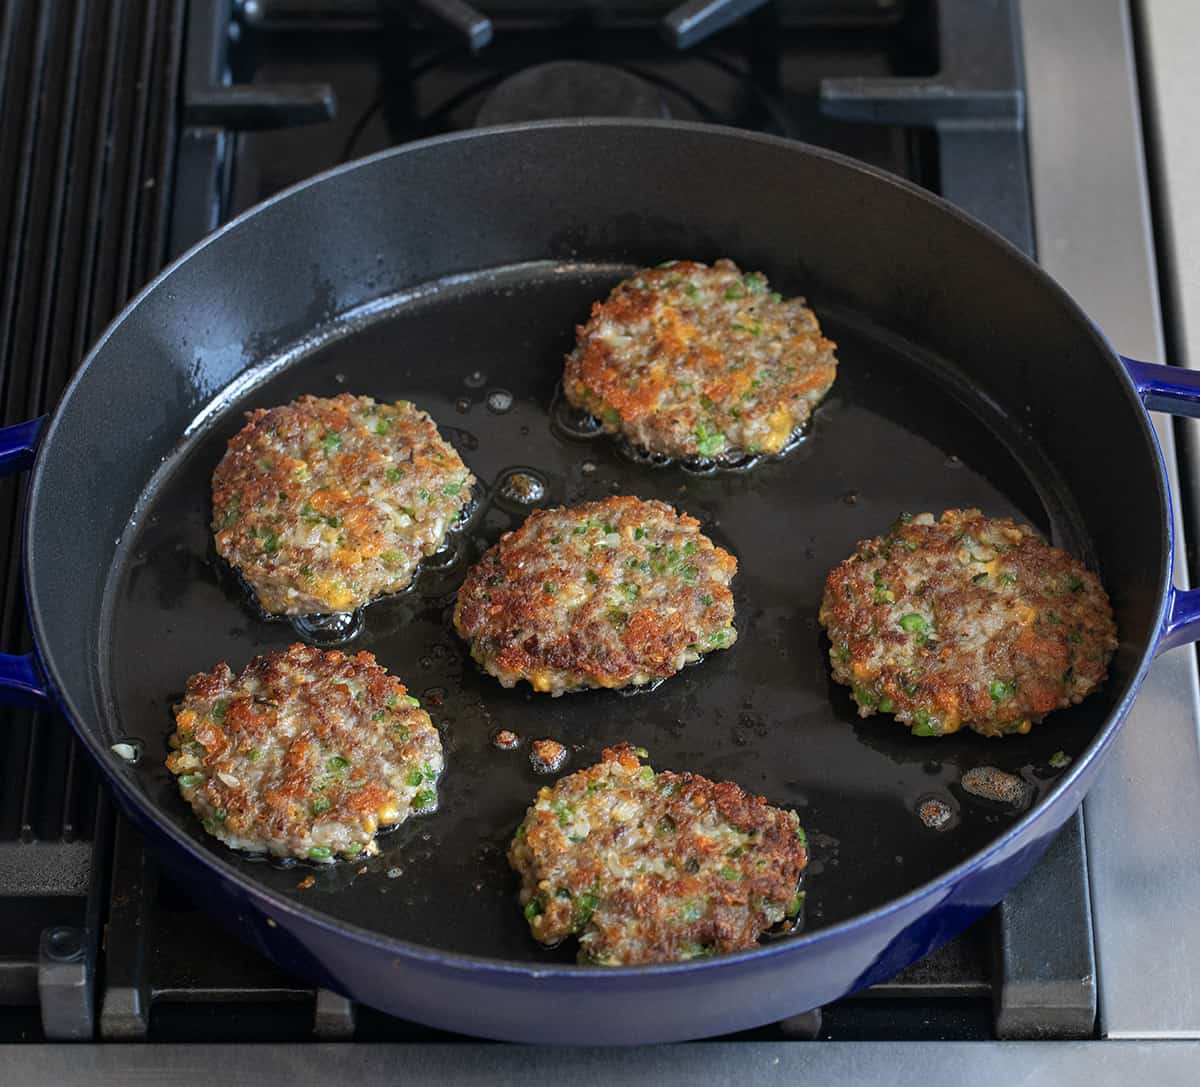 Jalapeno Cheese Sausage Patties in a skillet on a stovetop cooking.